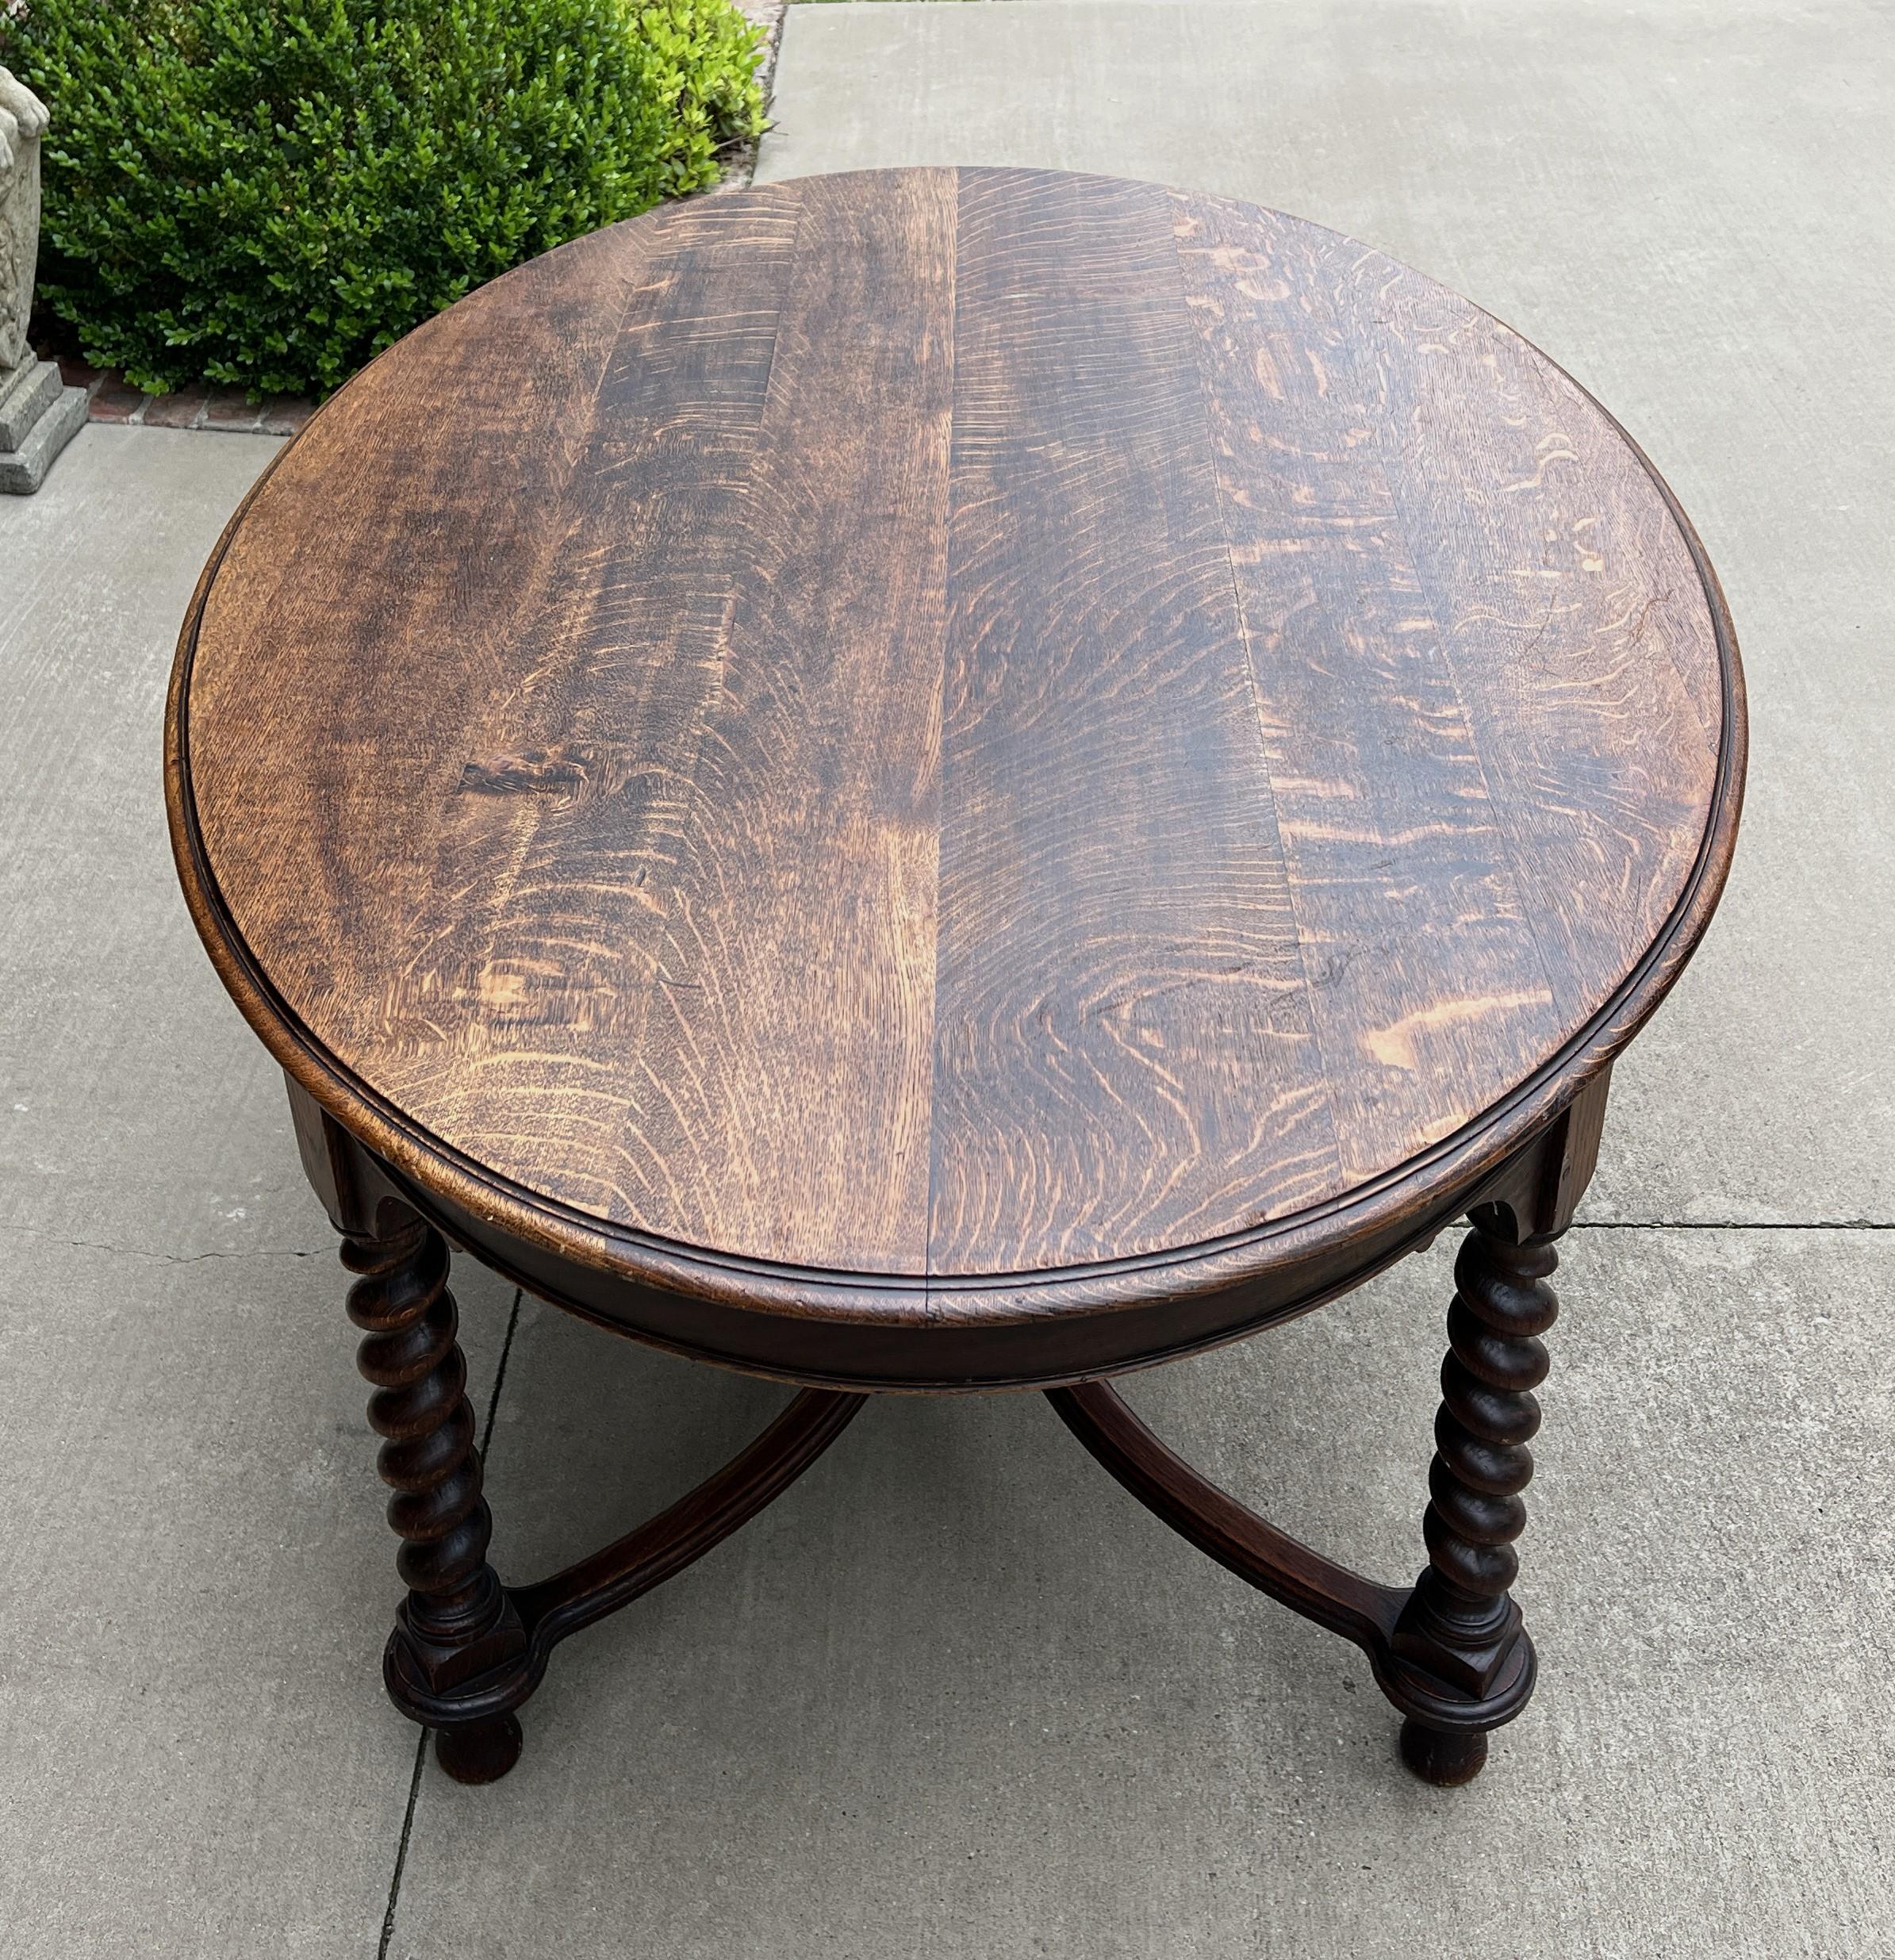 Carved Antique English Dining Table Oval Breakfast Card Game Table Oak Barley Twist